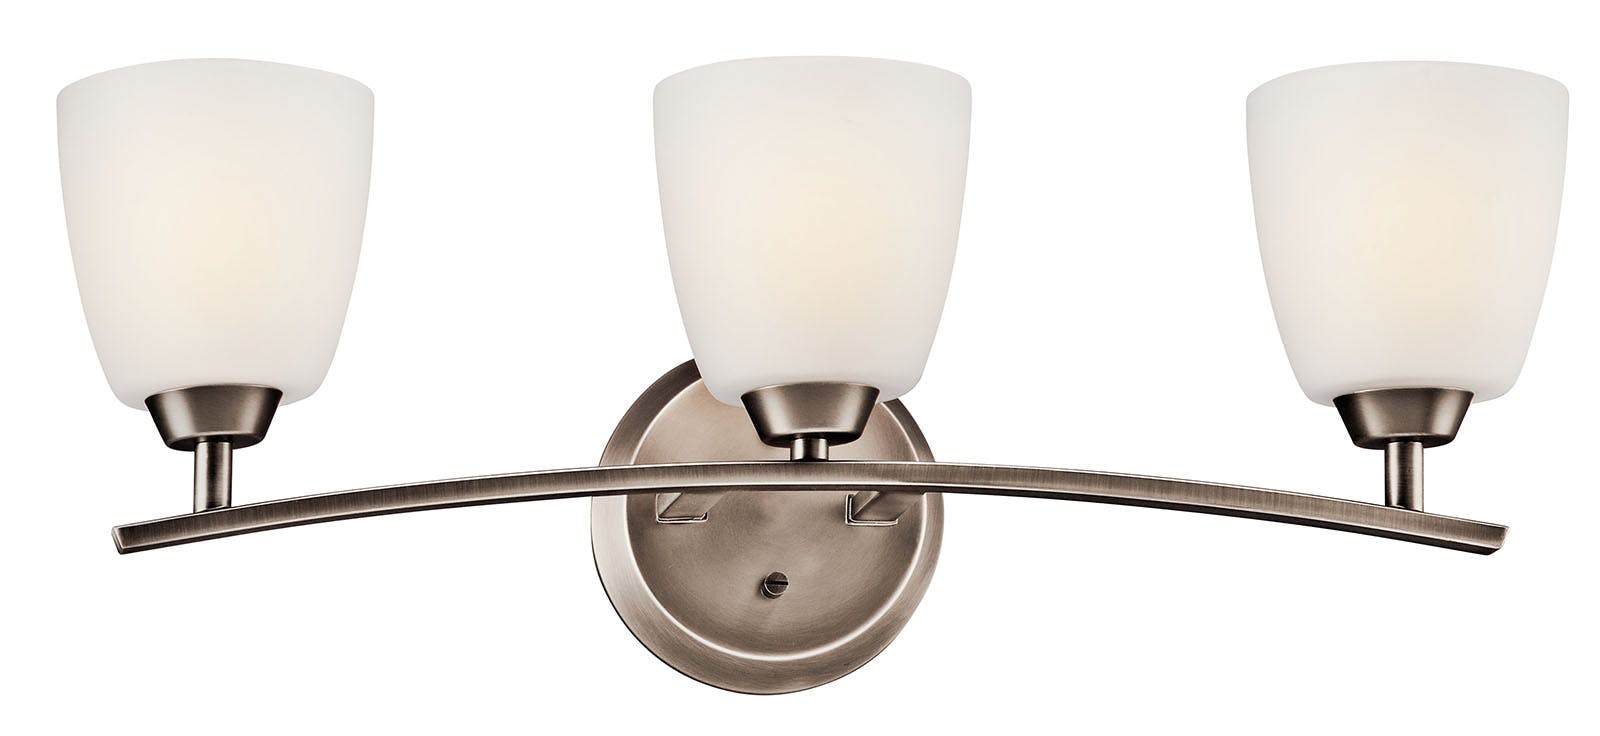 Granby 3 Light Vanity Light in Pewter on a white background